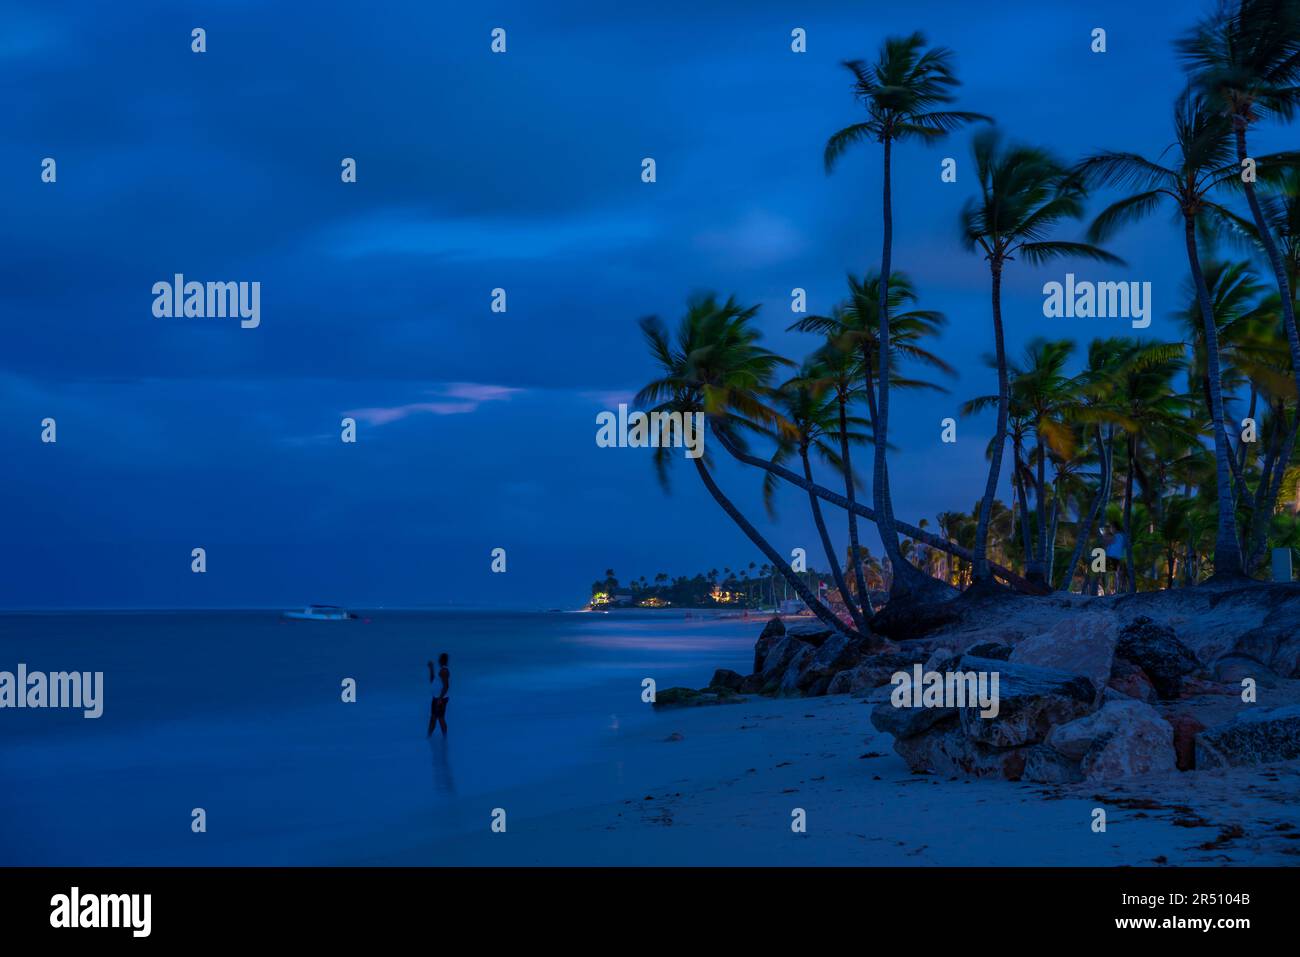 View of palm trees on Bavaro Beach at dusk, Punta Cana, Dominican Republic, West Indies, Caribbean, Central America Stock Photo